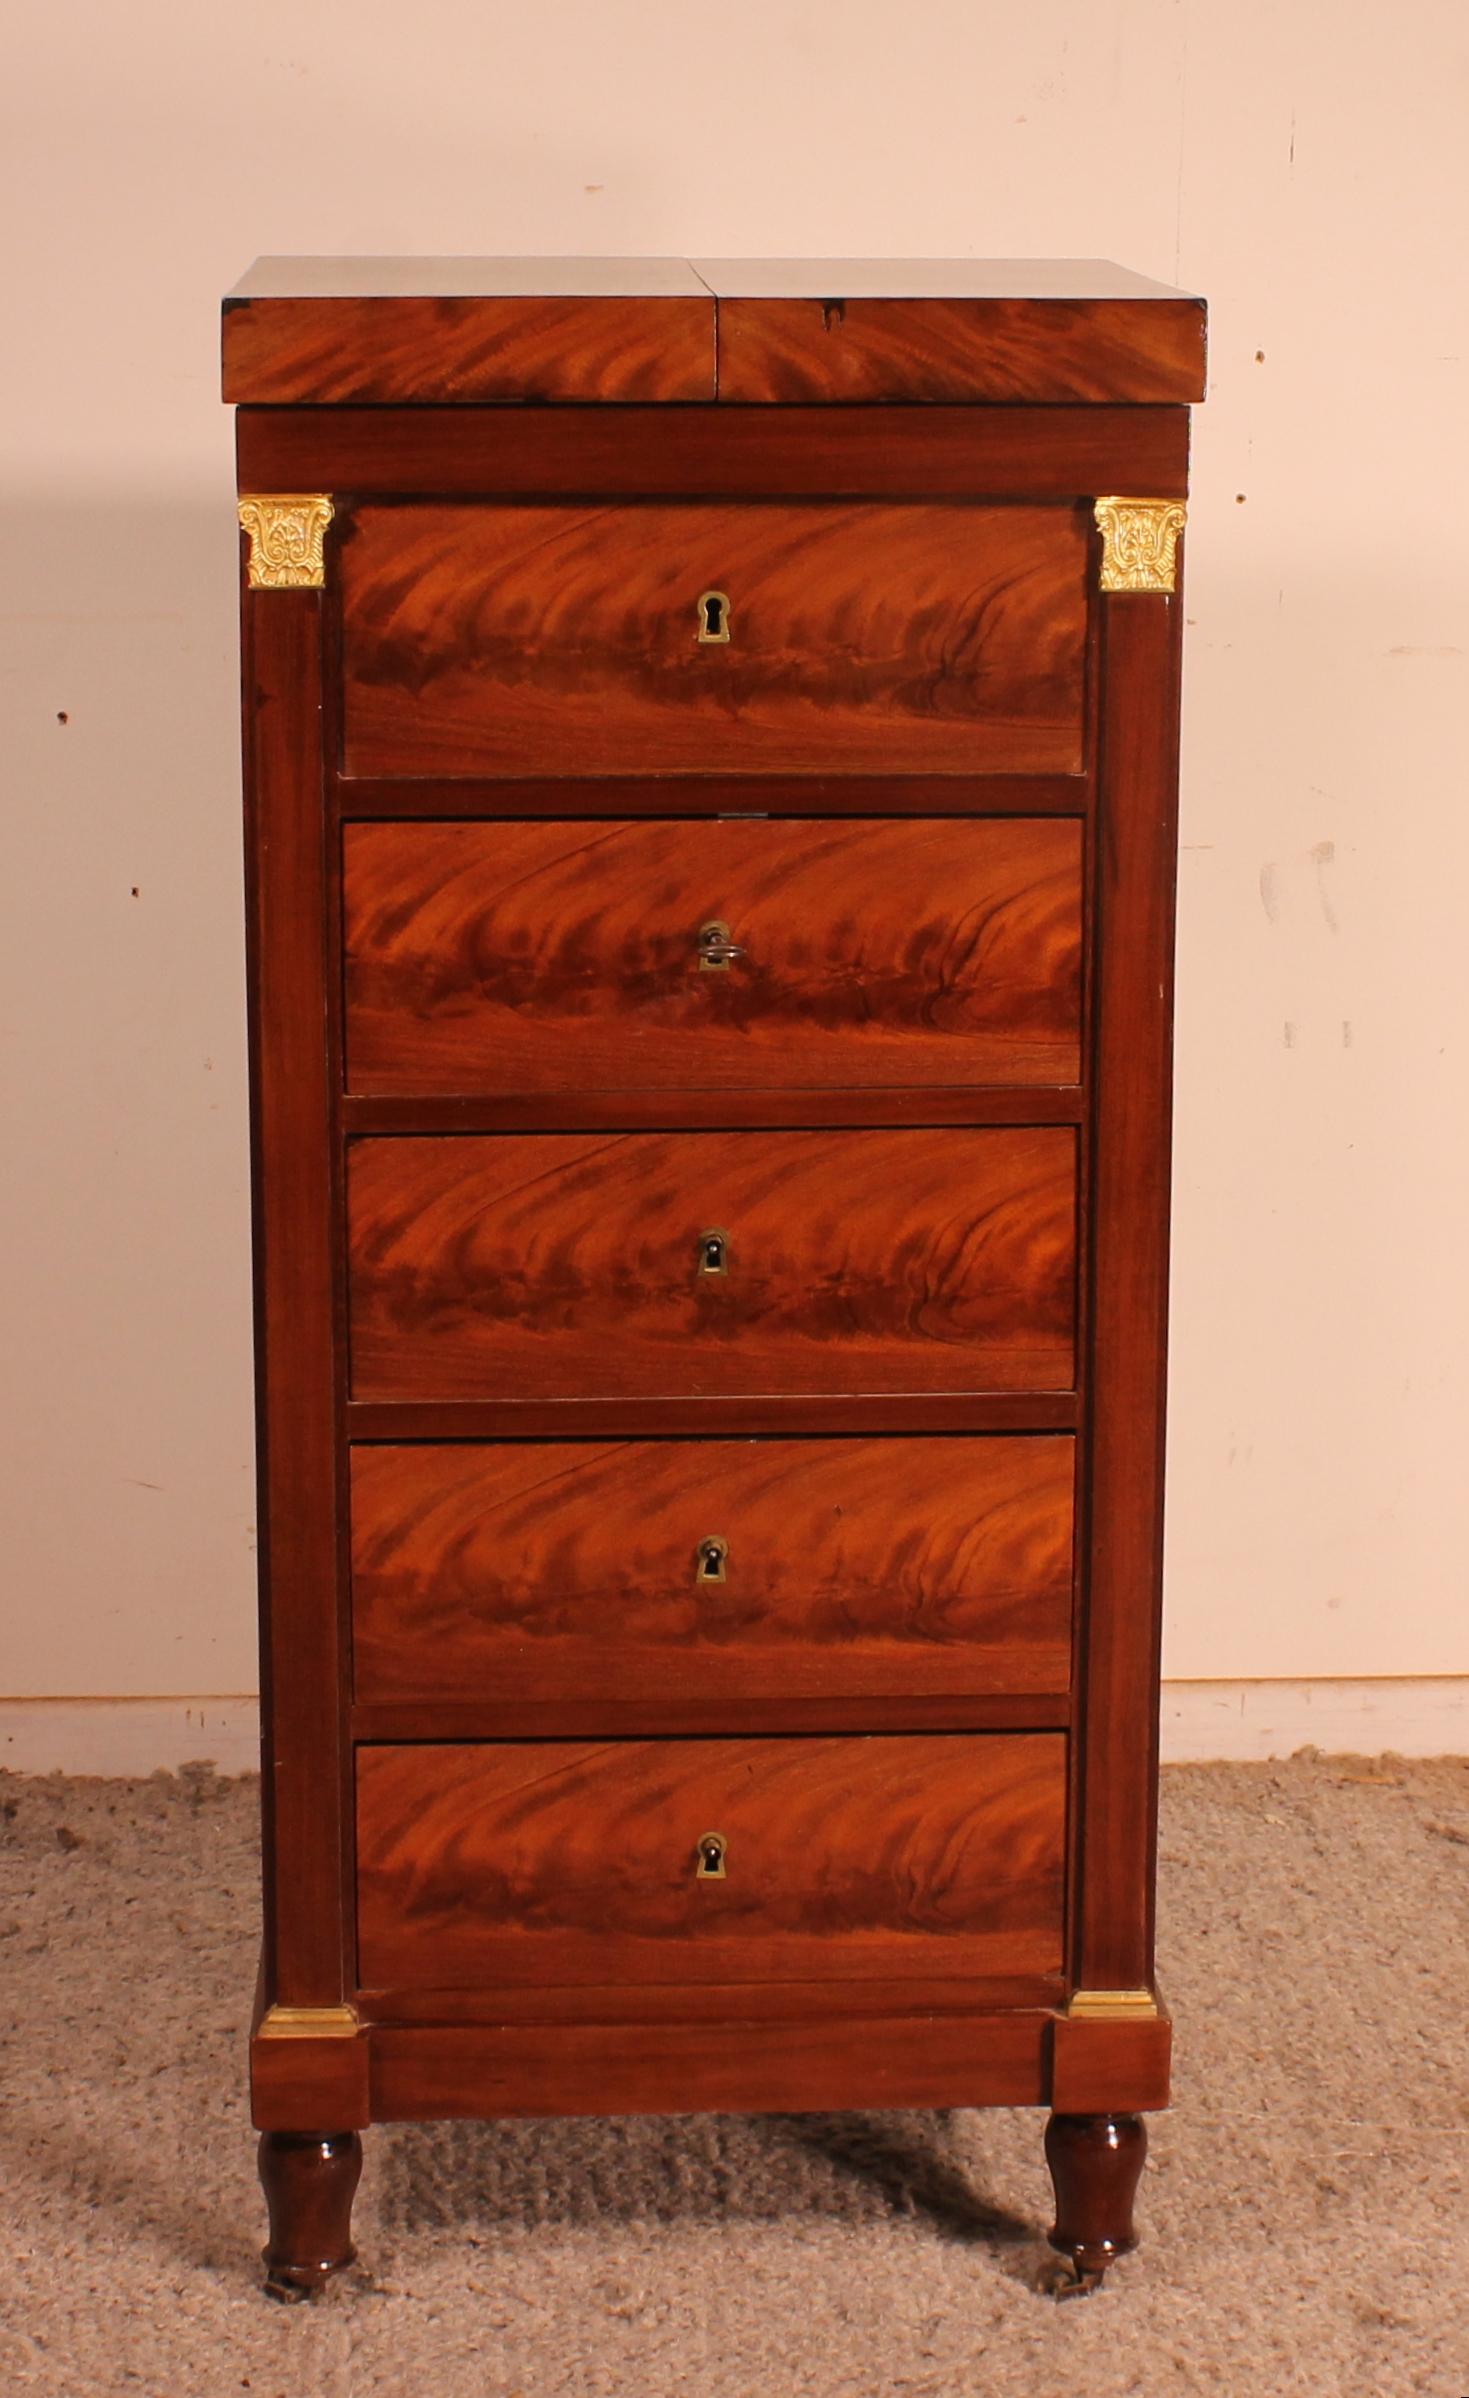 Elegant barber furniture in solid mahogany and mahogany veneer from the early 19th century Empire period
Very beautiful barbière composed of 5 drawers. interior of the drawers in oak and finished with dovetail
Rack mirror mechanism (original